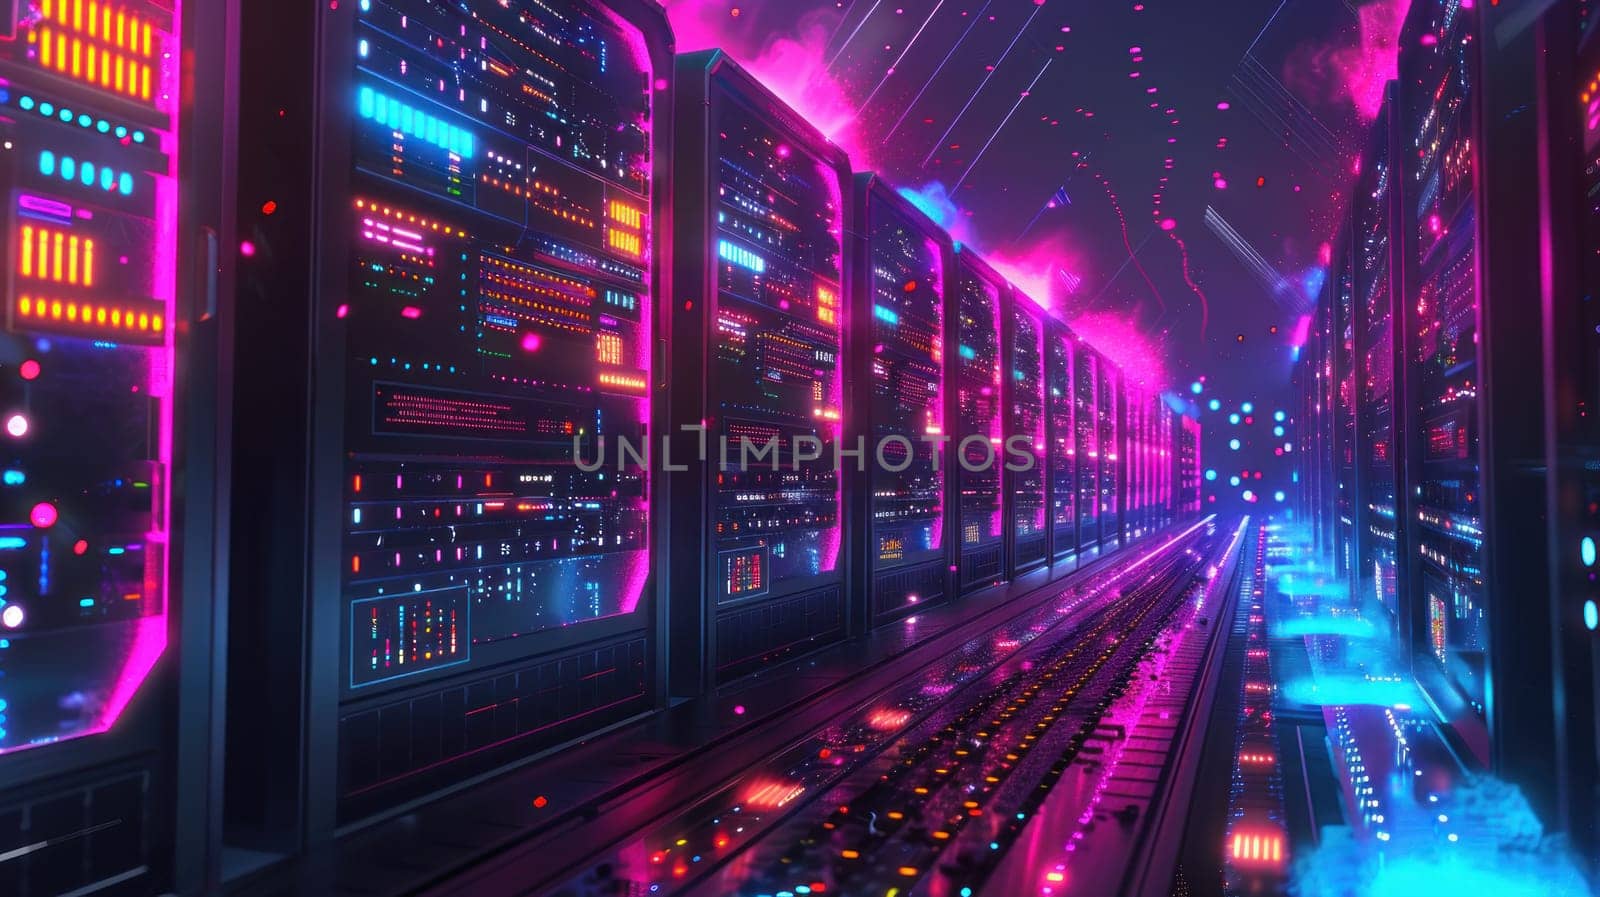 A dynamic illustration of a bitcoin mining operation with rows of computers processing transaction.